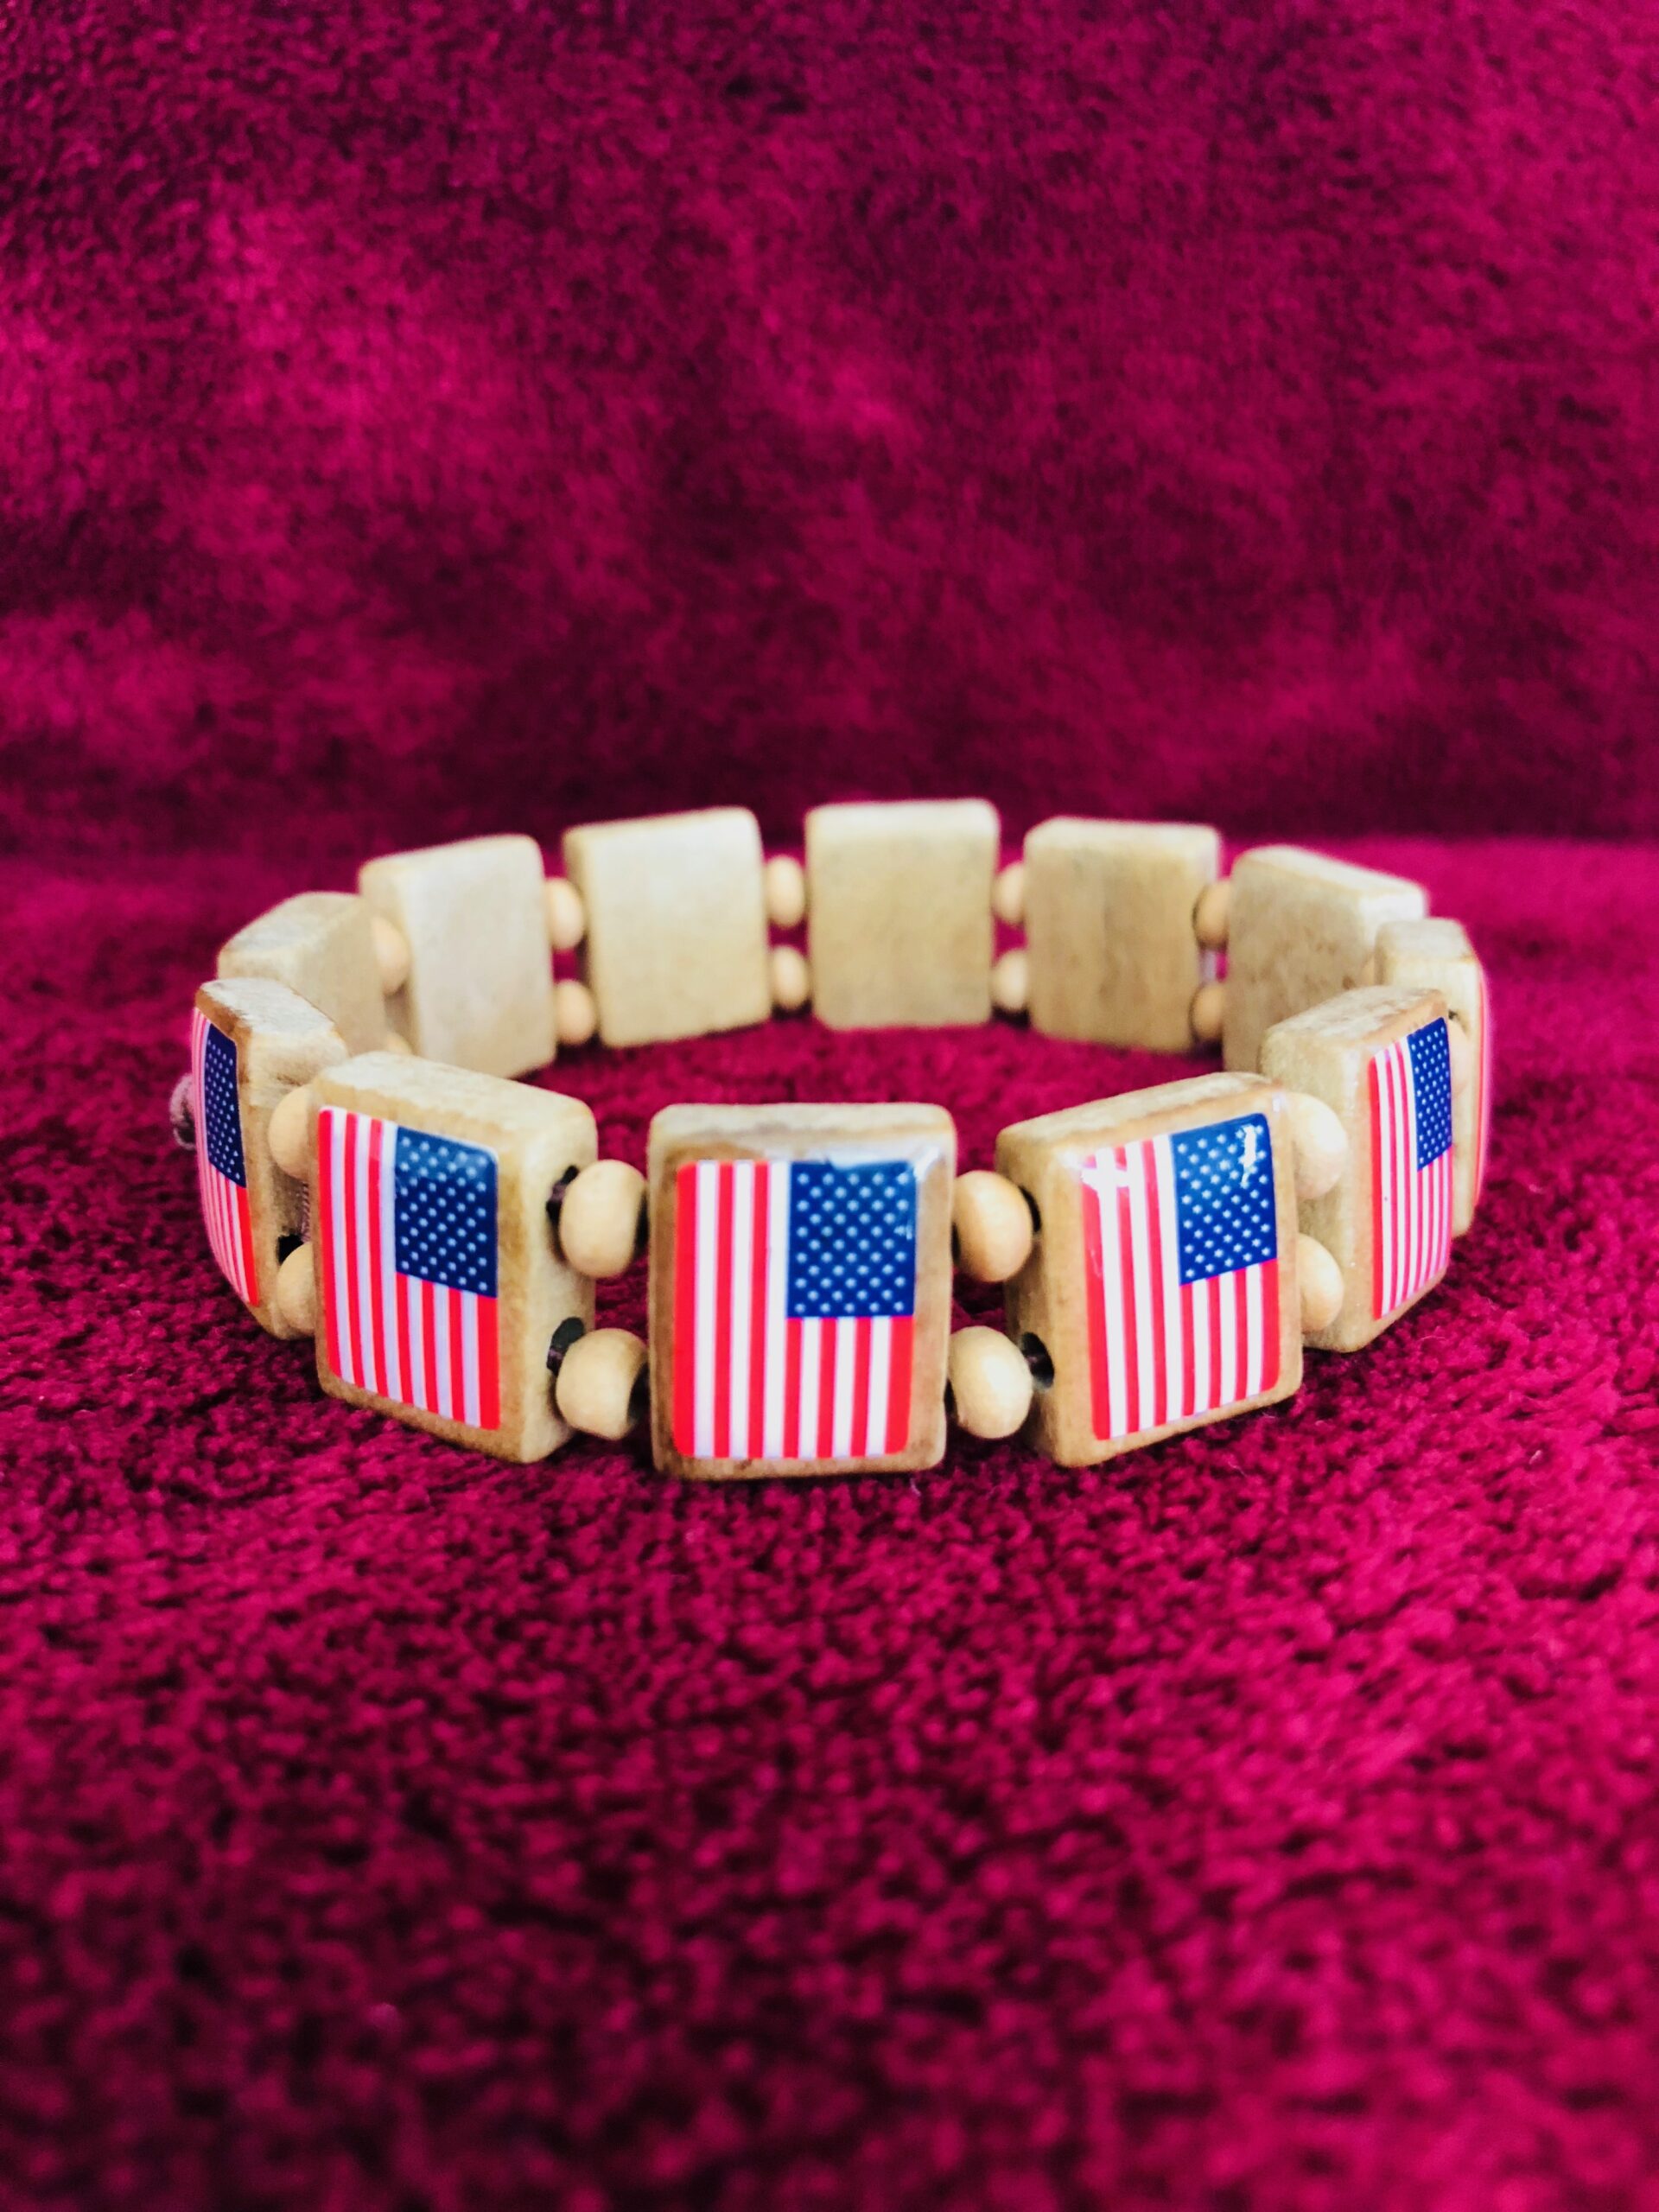 Amwrican Flag Rubber band bracelet loom Good Color Matching Fund Raising  America